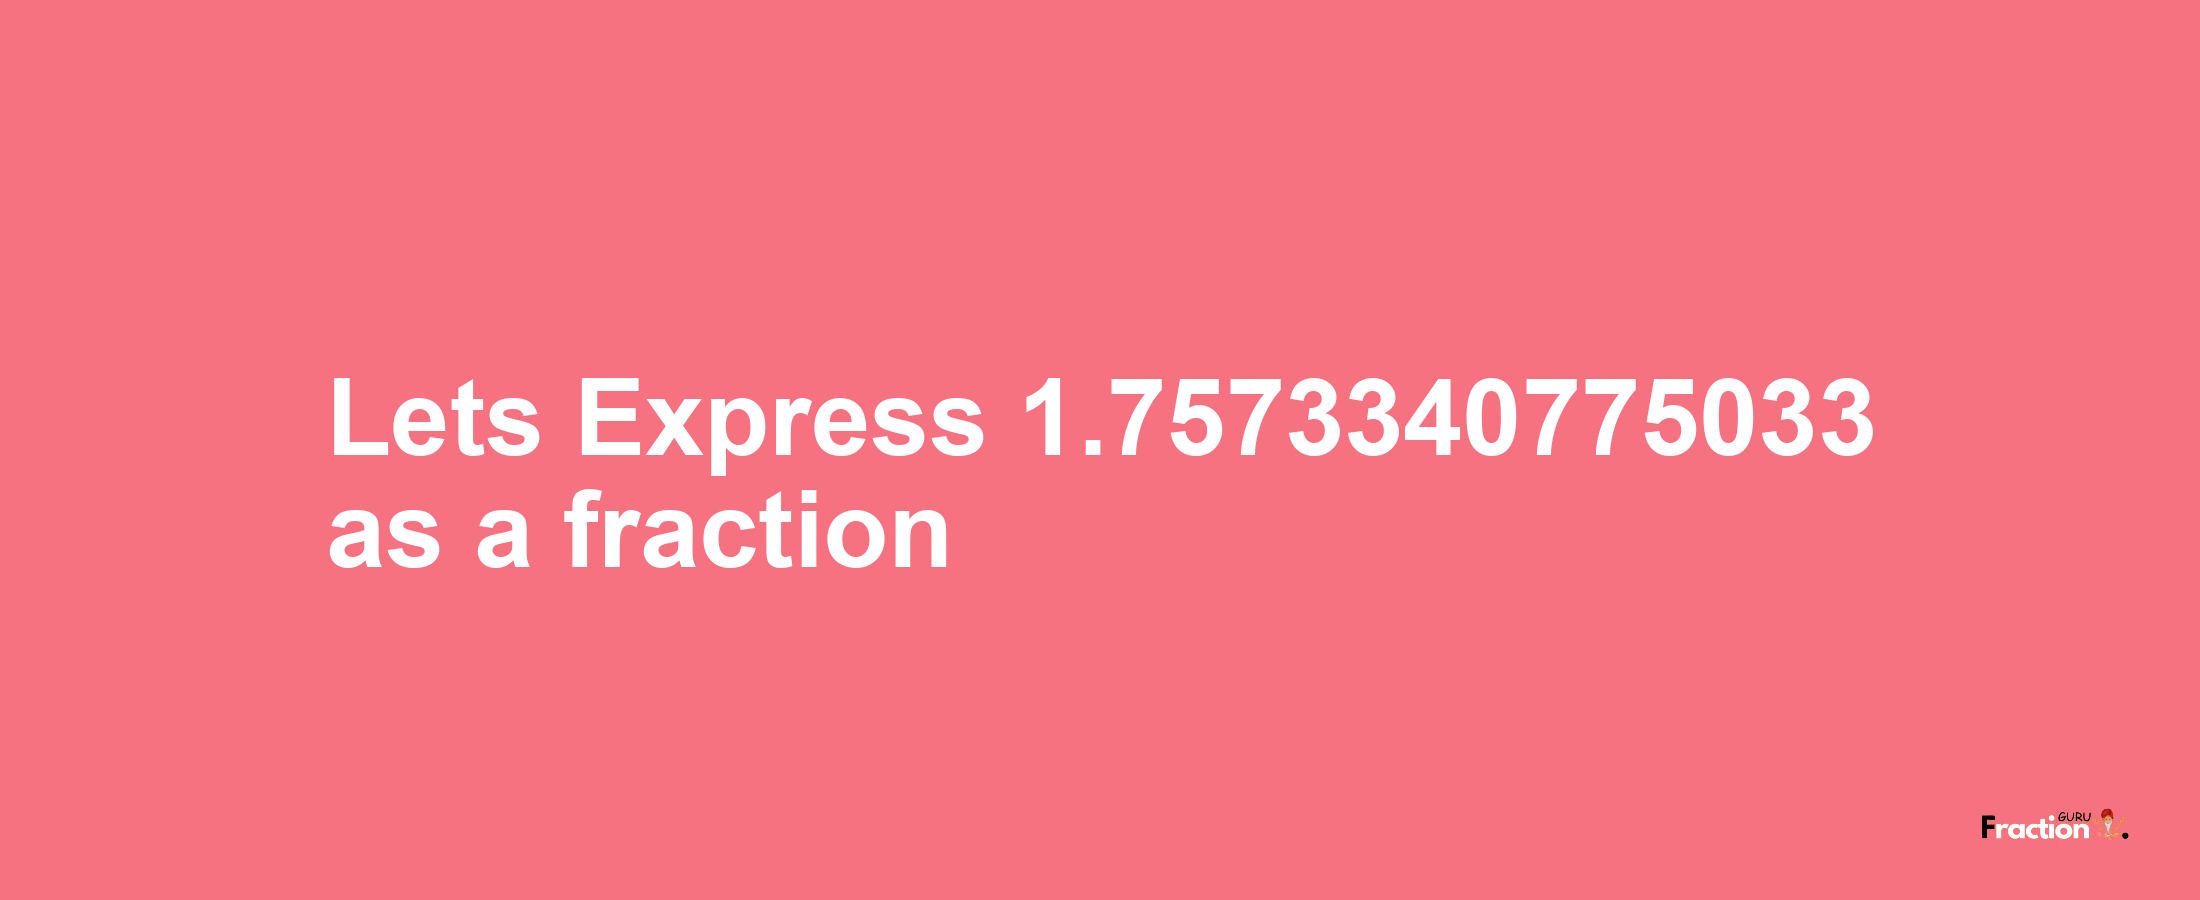 Lets Express 1.7573340775033 as afraction